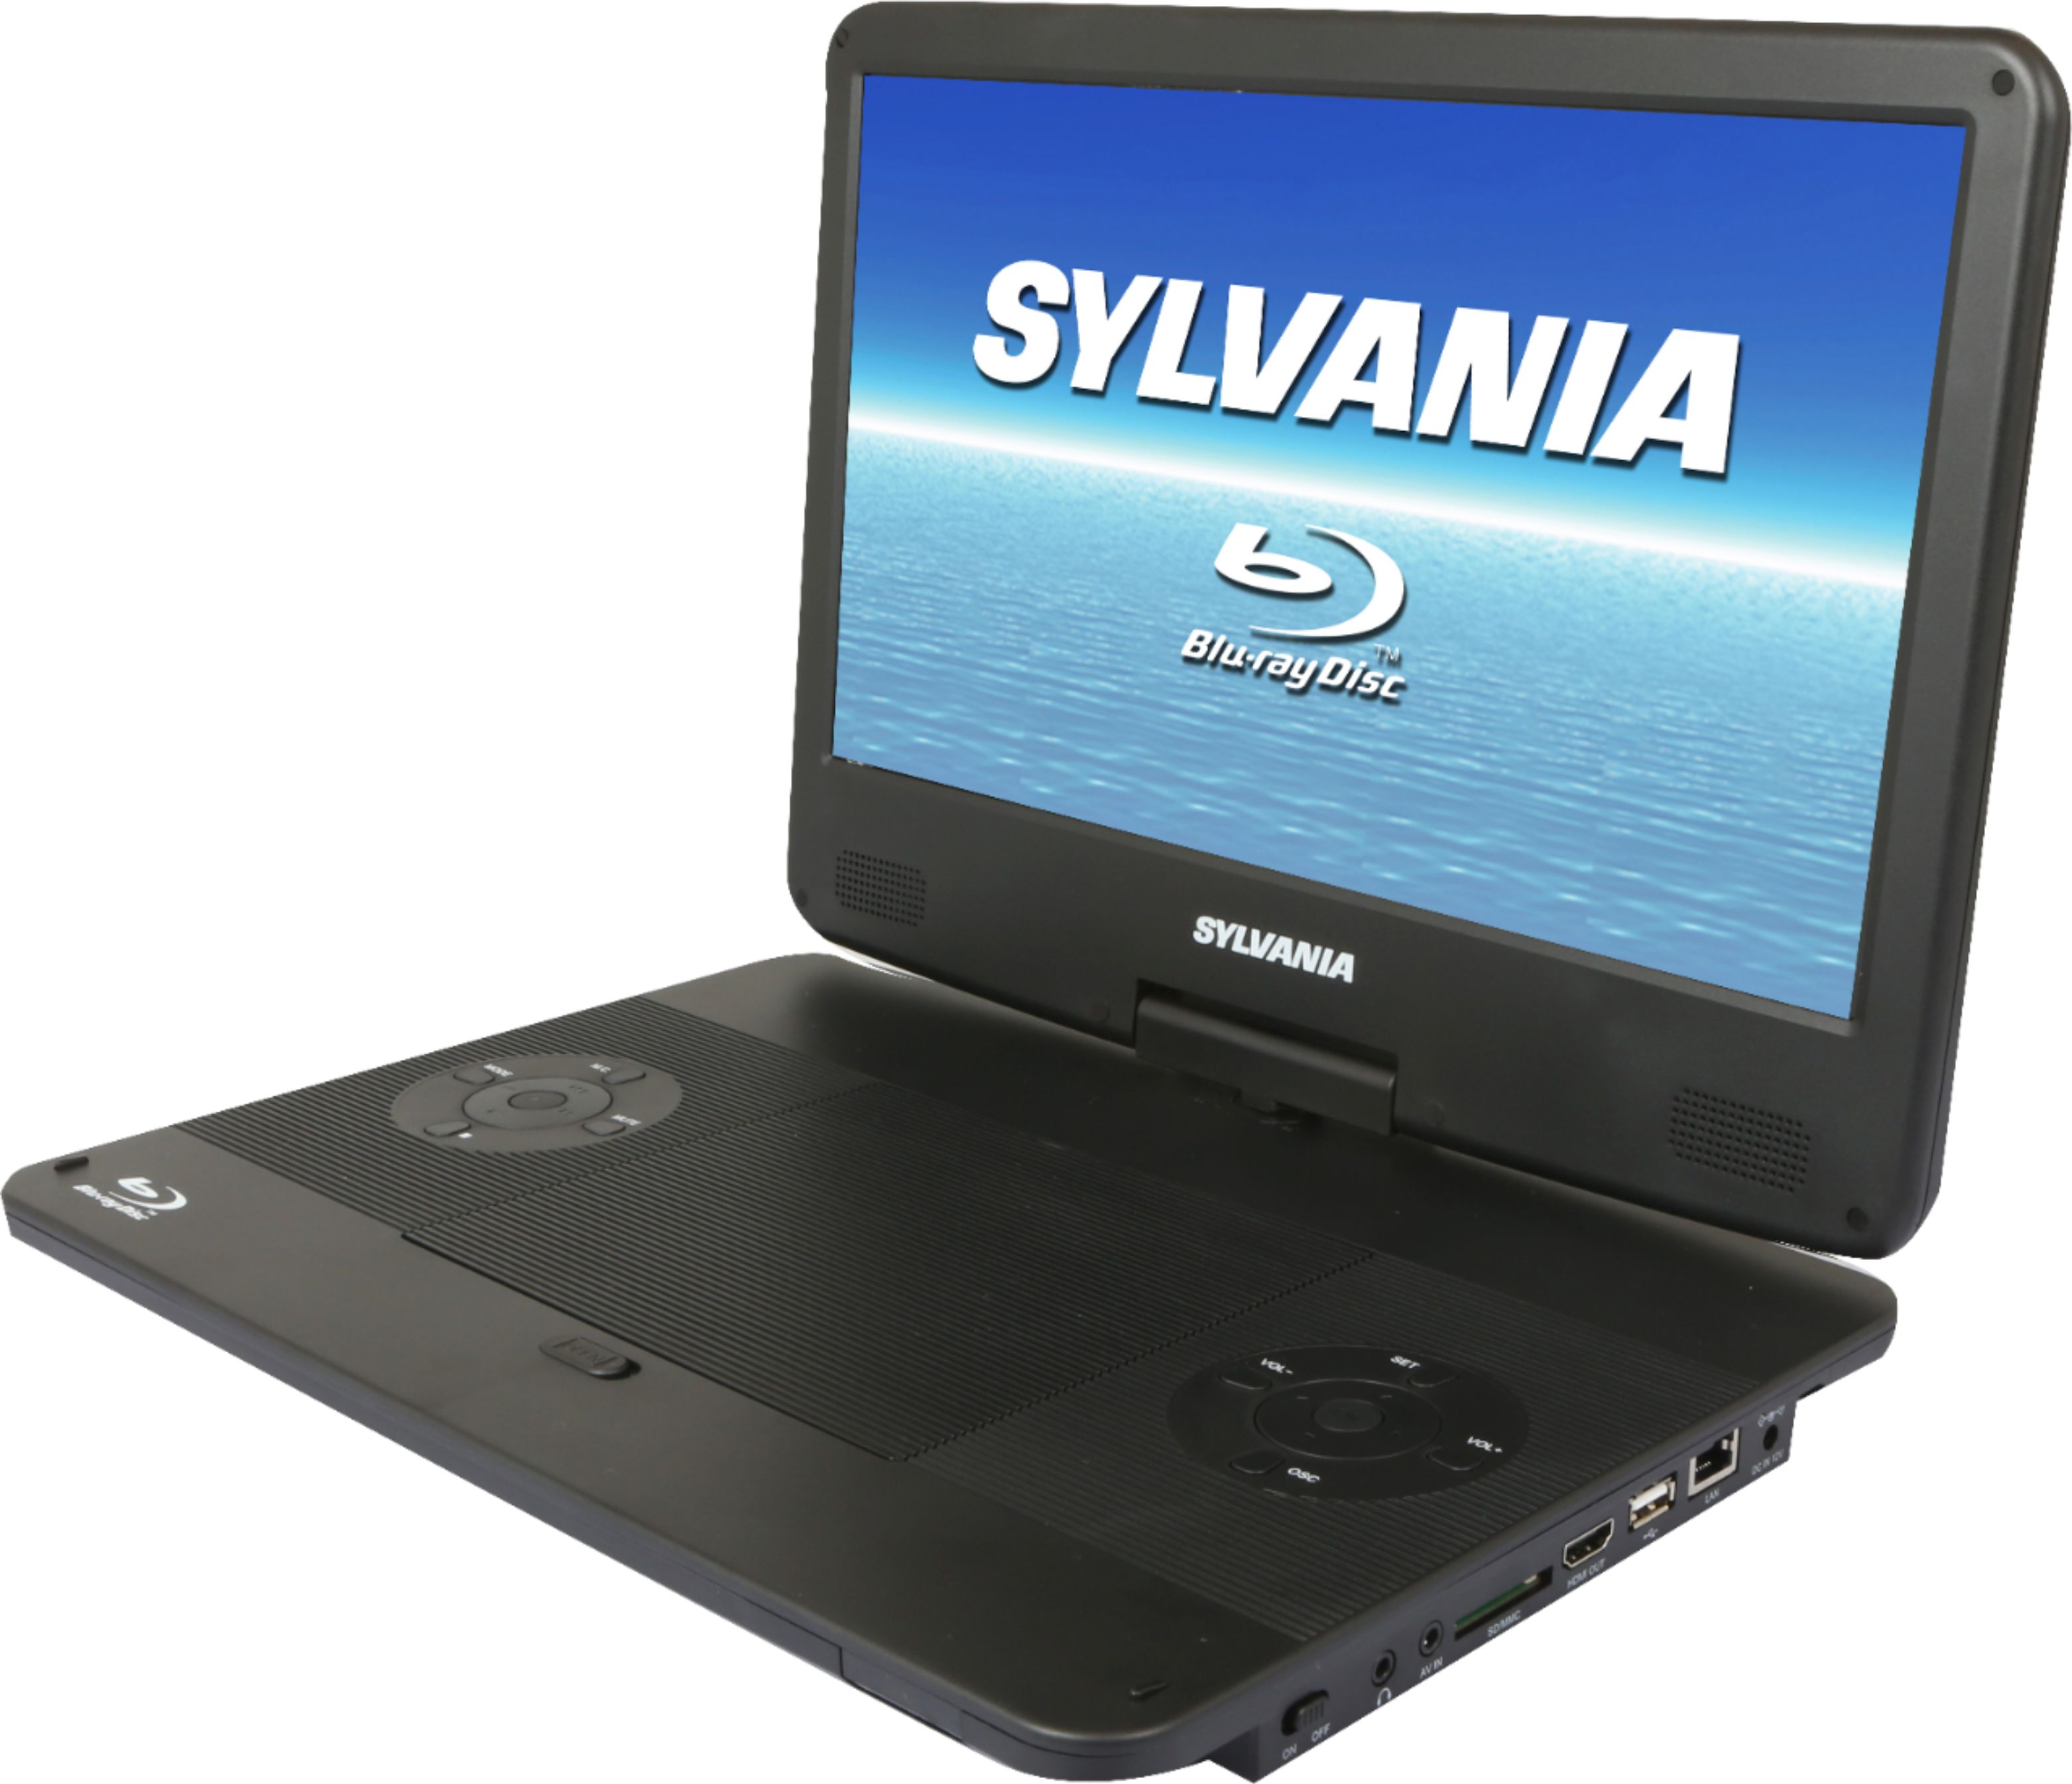 DVD Players for sale in Lulu, Florida